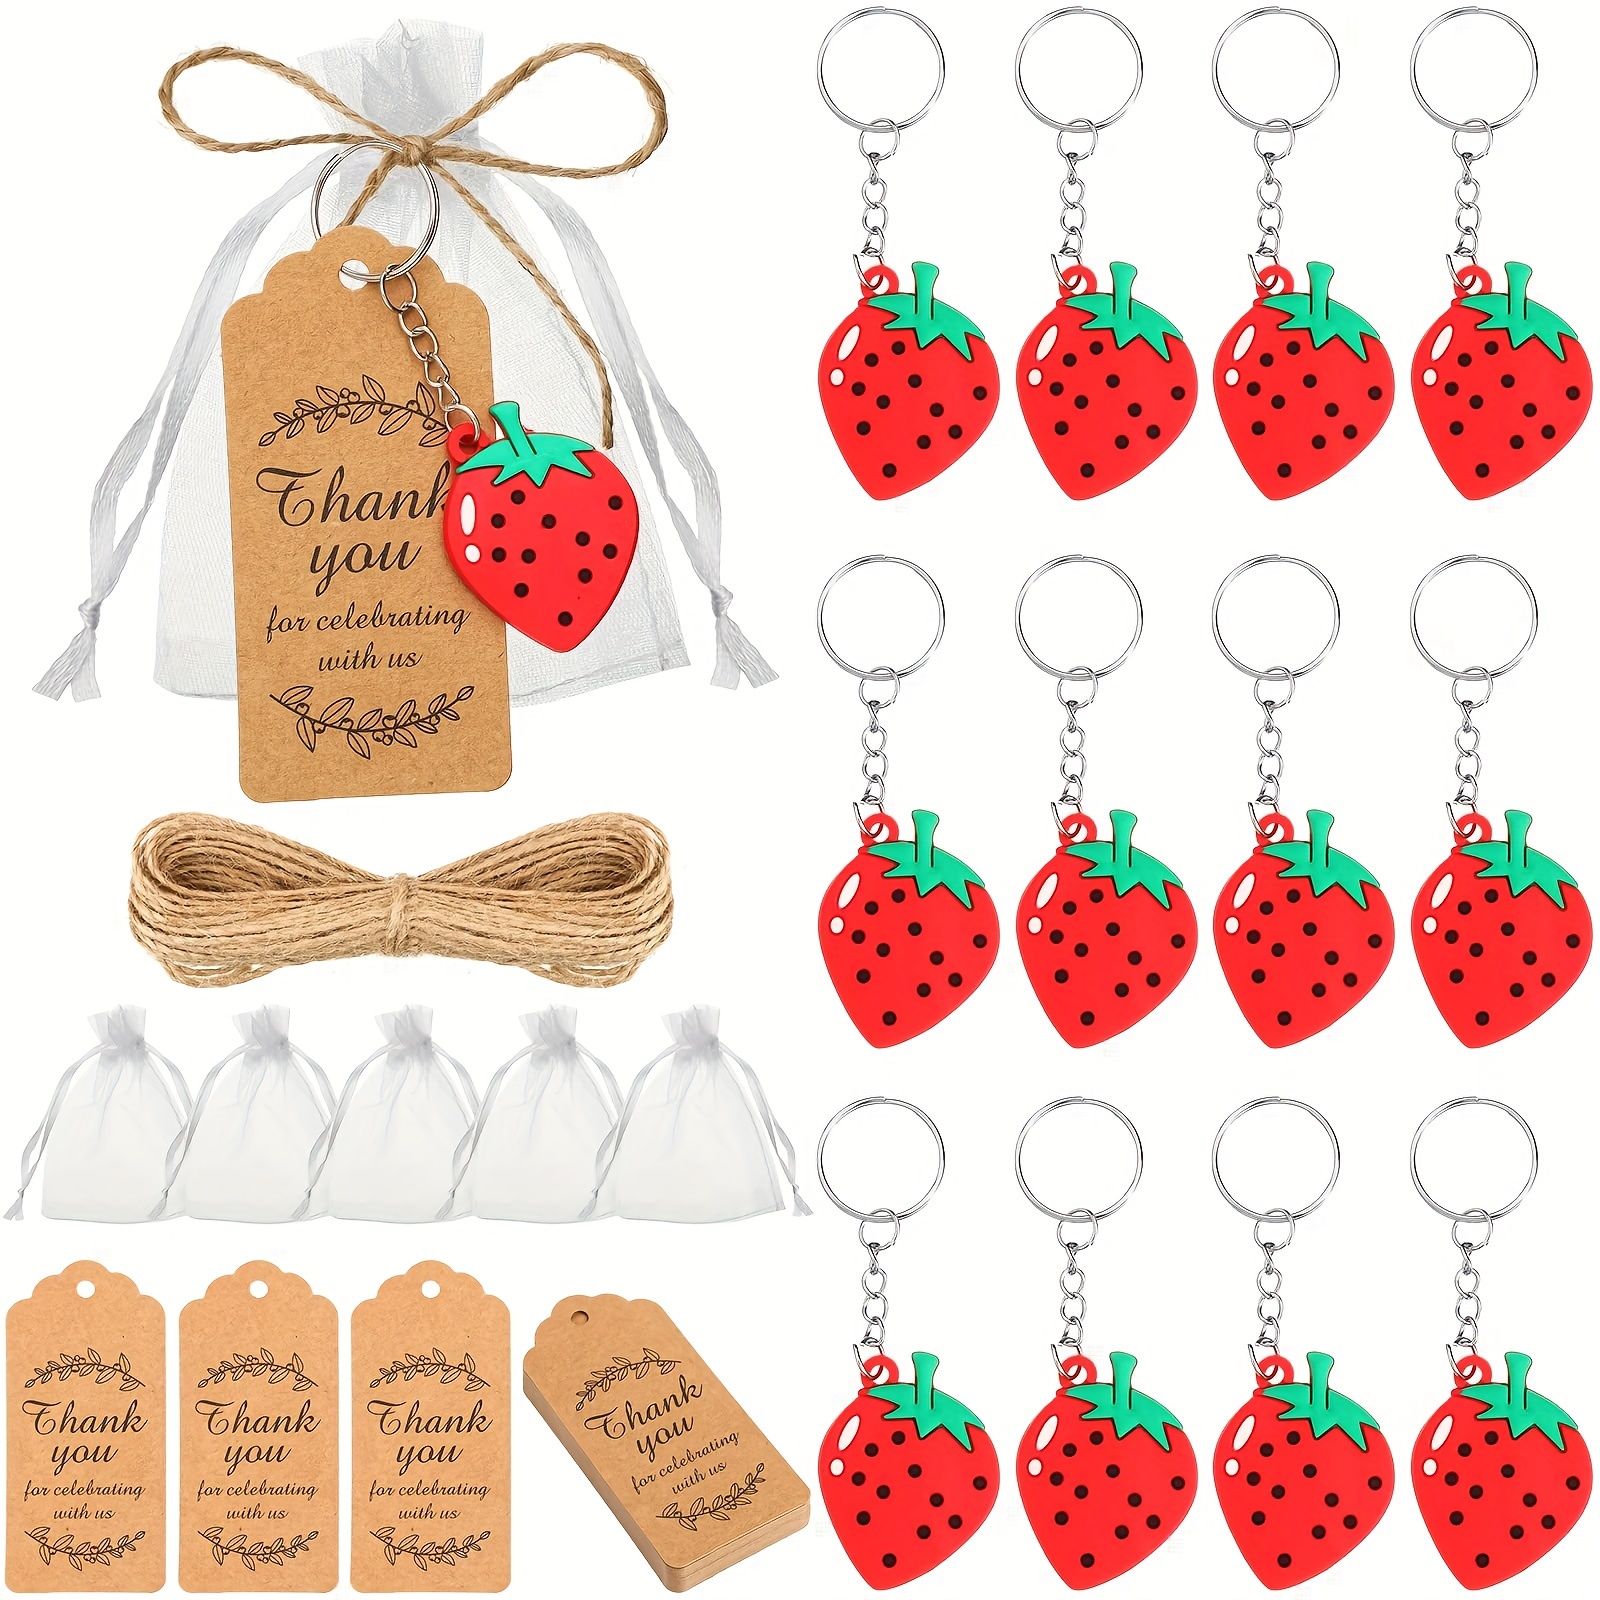 

Strawberry Keychain Party Favor Set - 37 Pcs Red Plastic Strawberry Themed Keychains With Thank You Tags, Gift Bags, And Hemp Rope For Shower And Party Guests